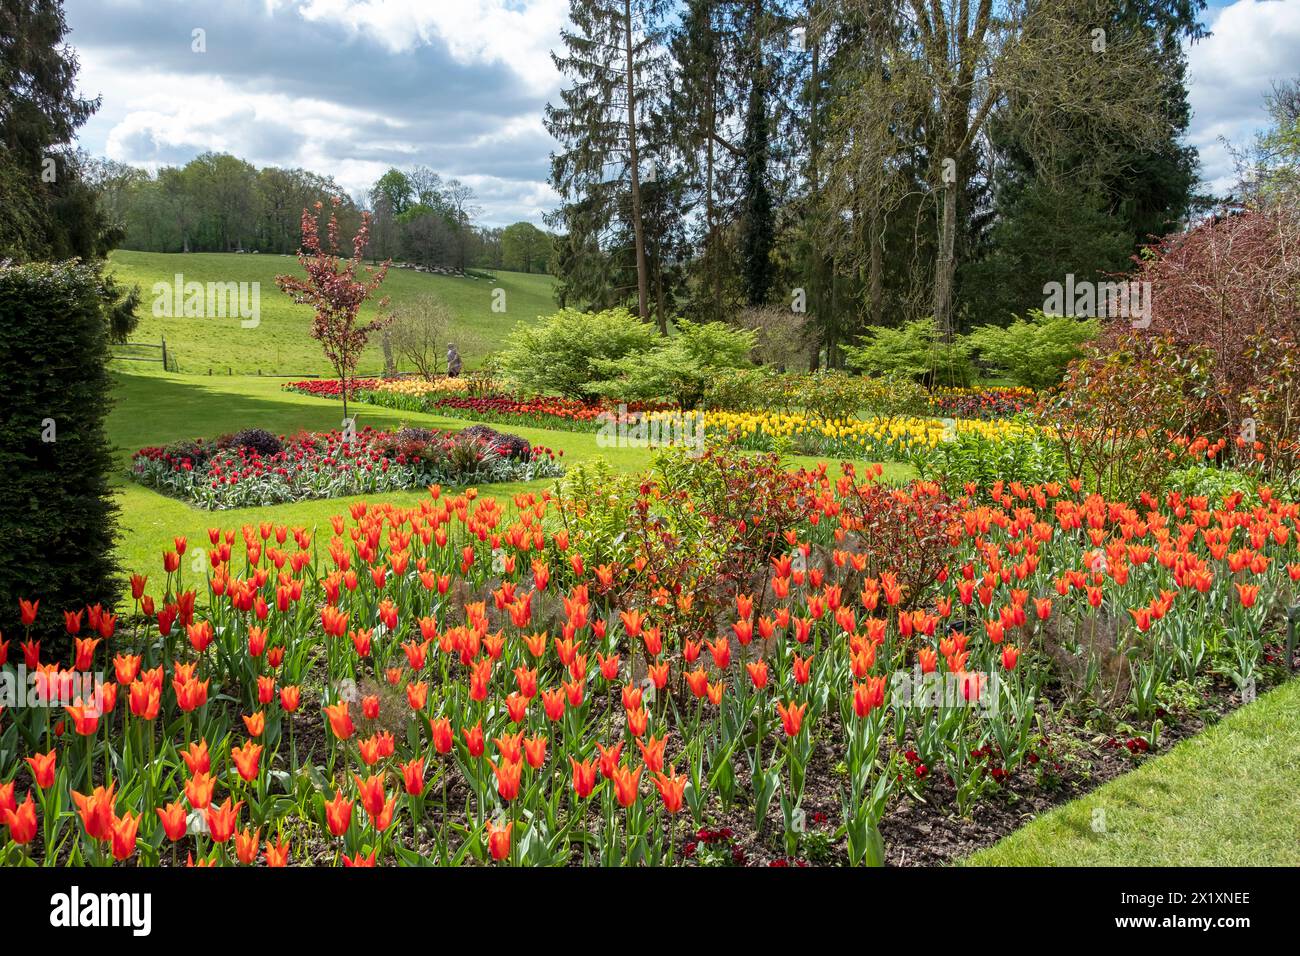 Pashley Manor Garden, Tulips and Manor House, East Sussex. ROYAUME-UNI Banque D'Images